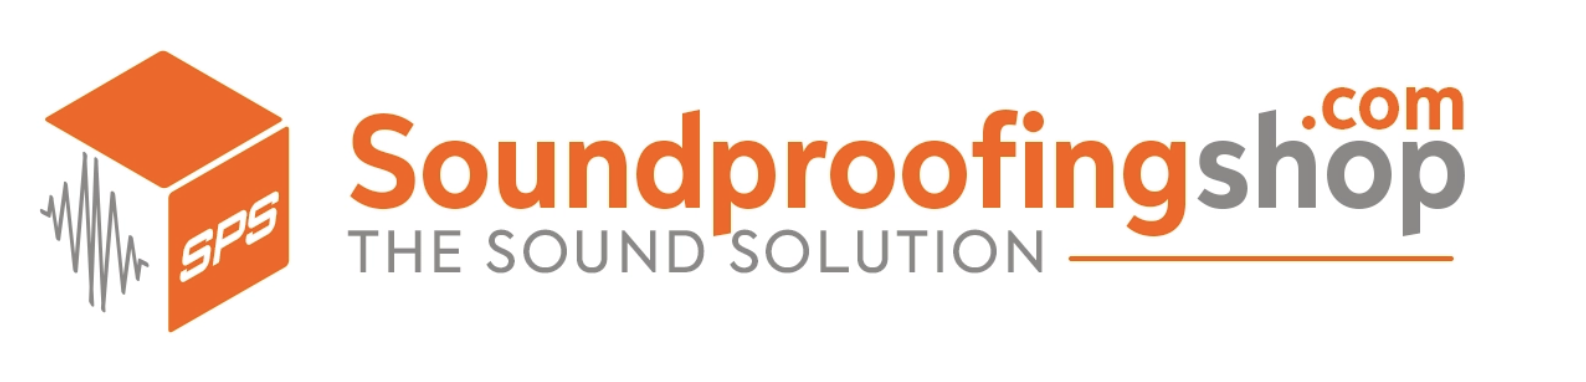 Soundproofing Logo.png